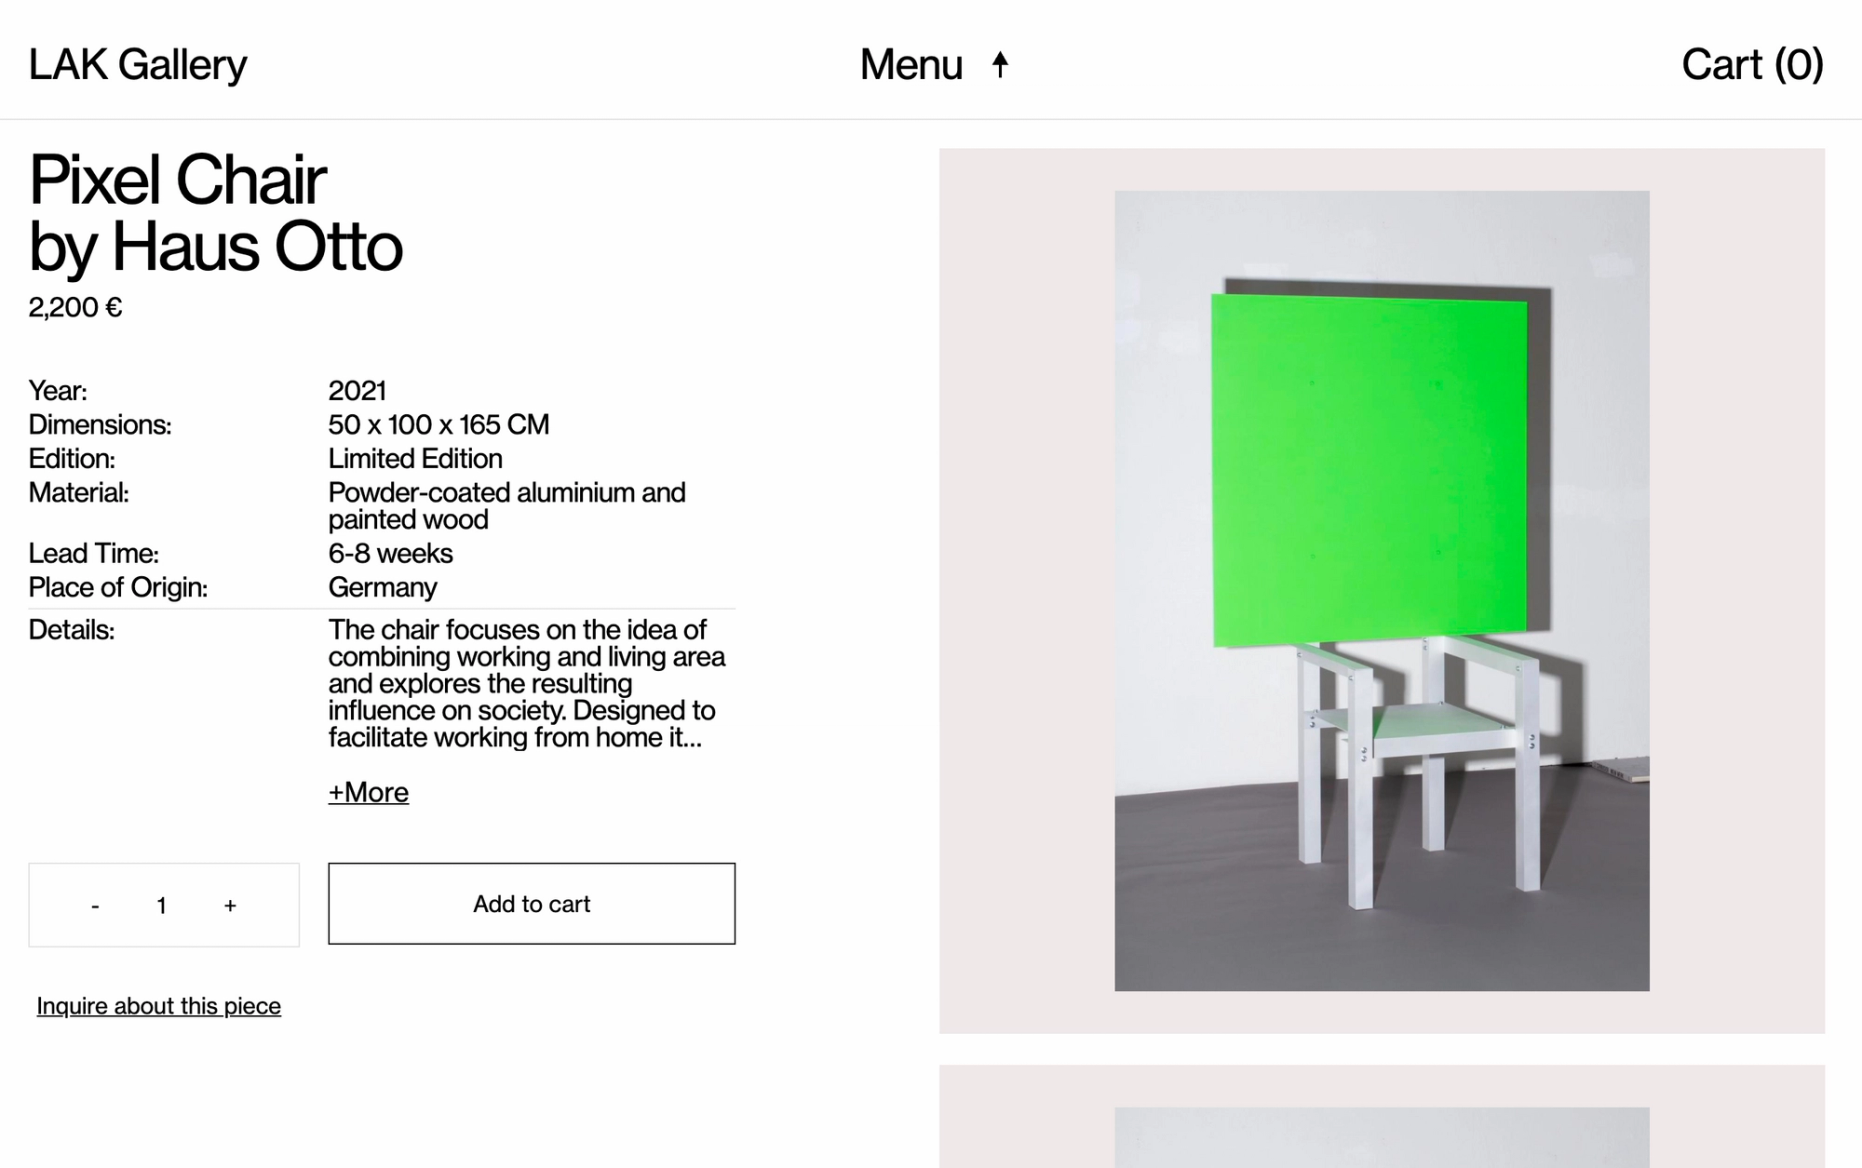 LAK Gallery's product page